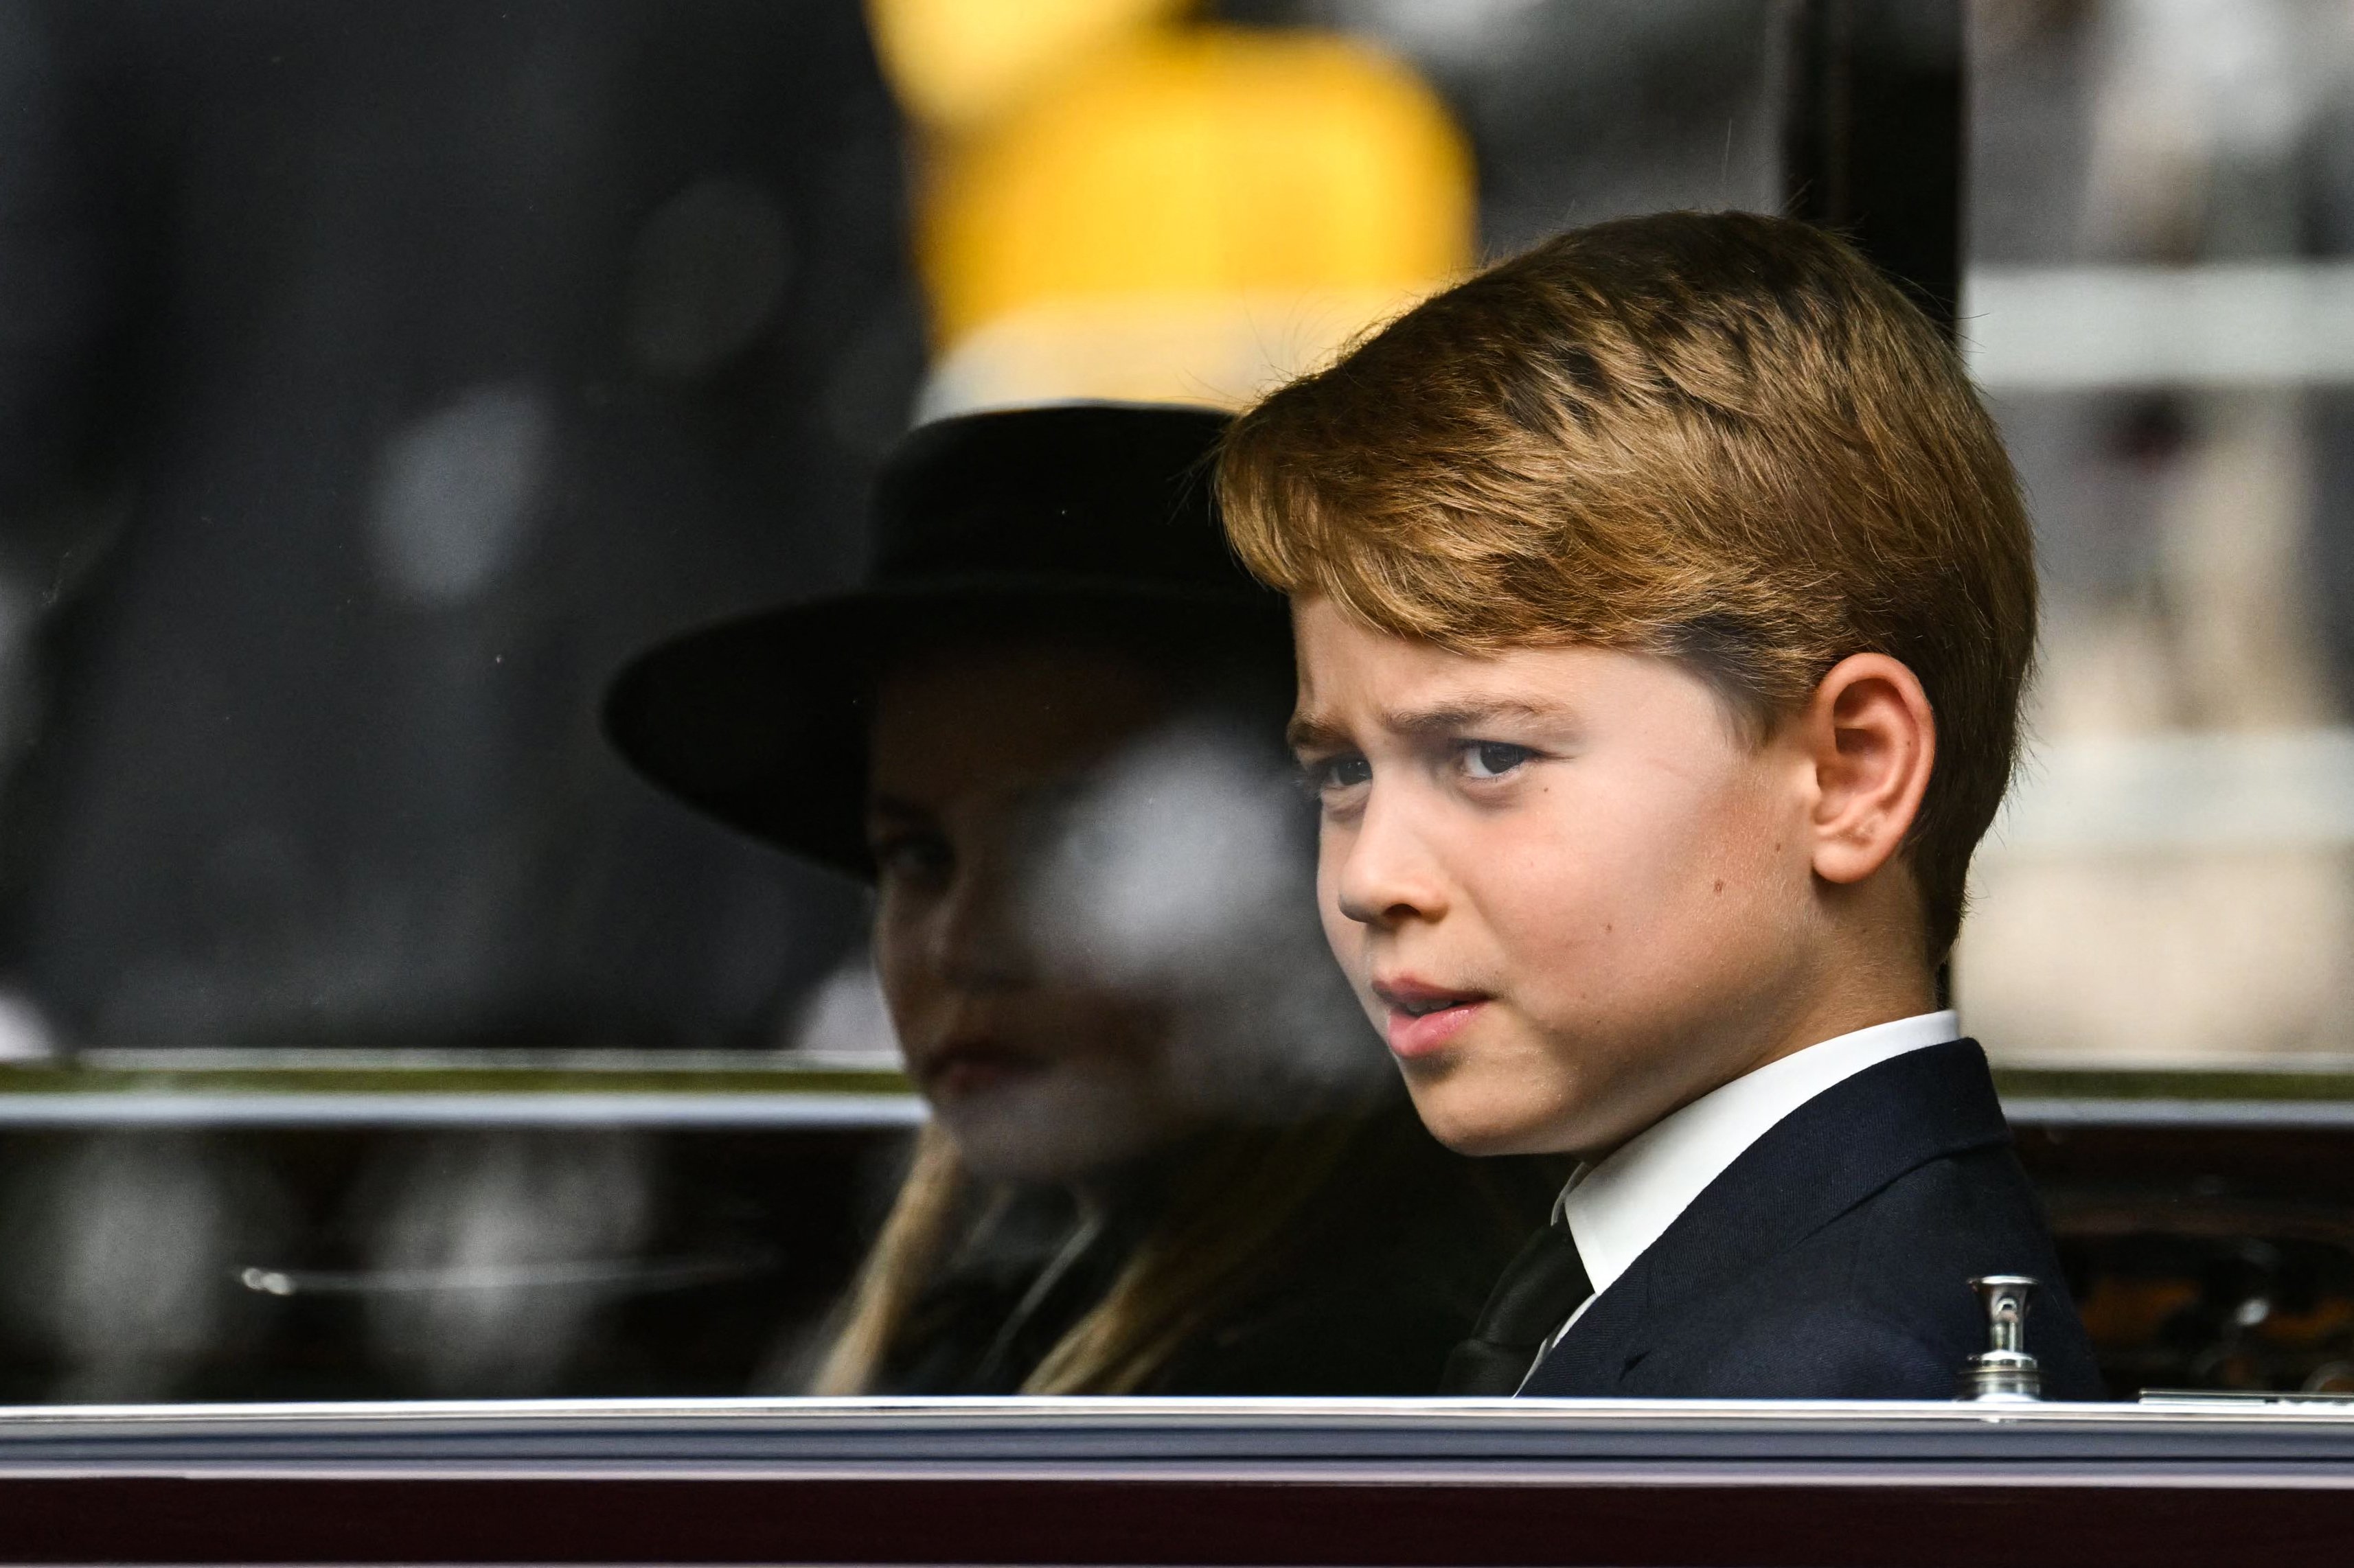 Princess Charlotte and Prince George follow Queen Elizabeth II's coffin from Westminster Abbey to Wellington Arch in London on September 19, 2022 | Source: Getty Images